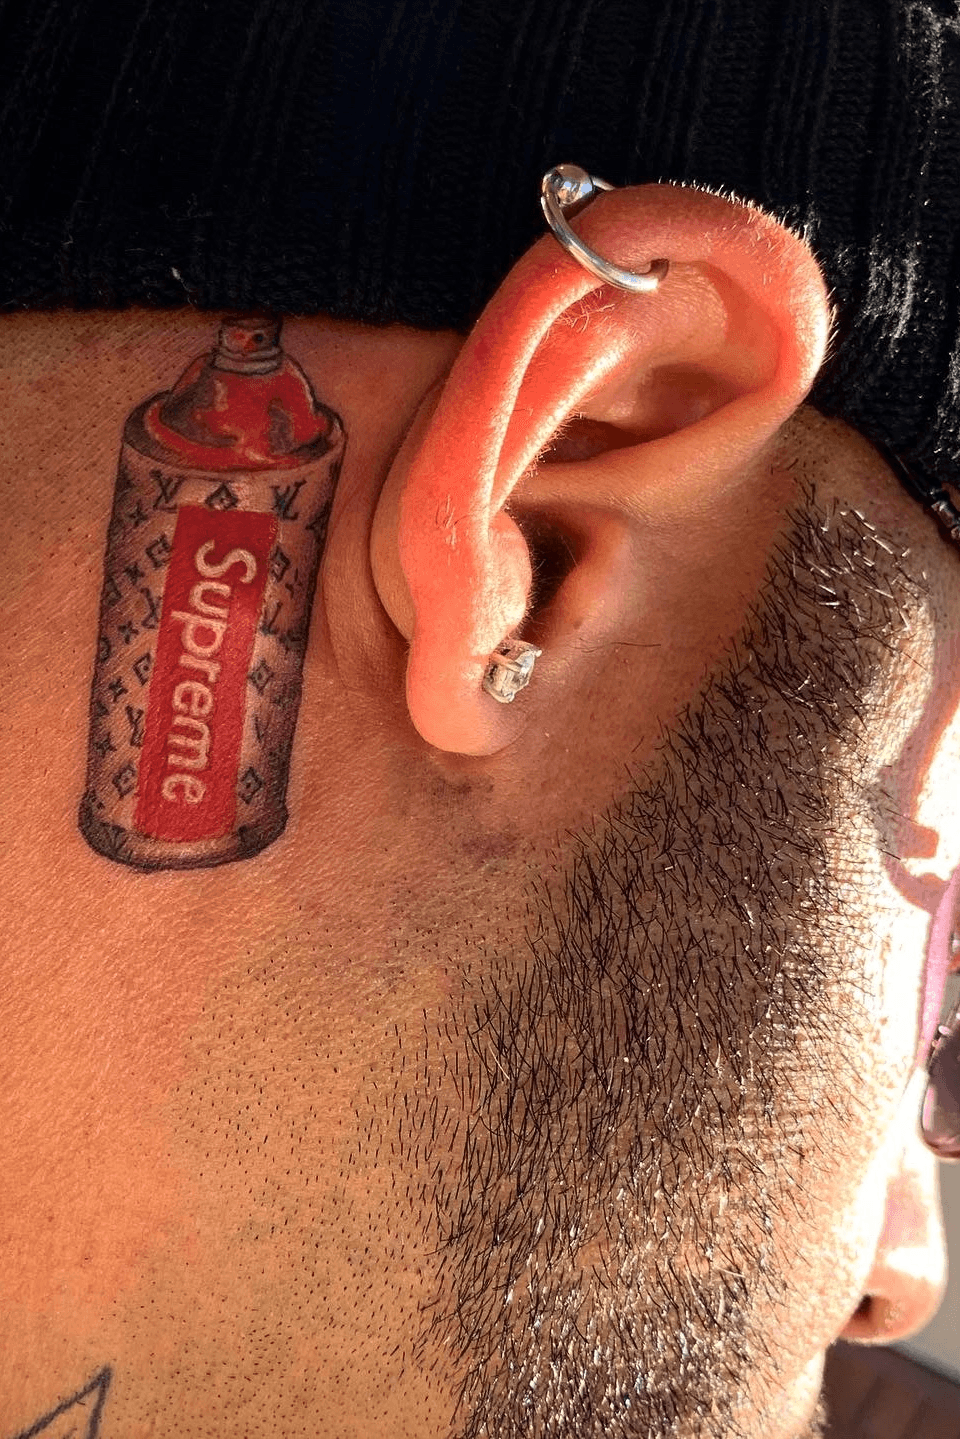 JR Smiths Supreme tattoo could run afoul of NBA rules  Sports Illustrated